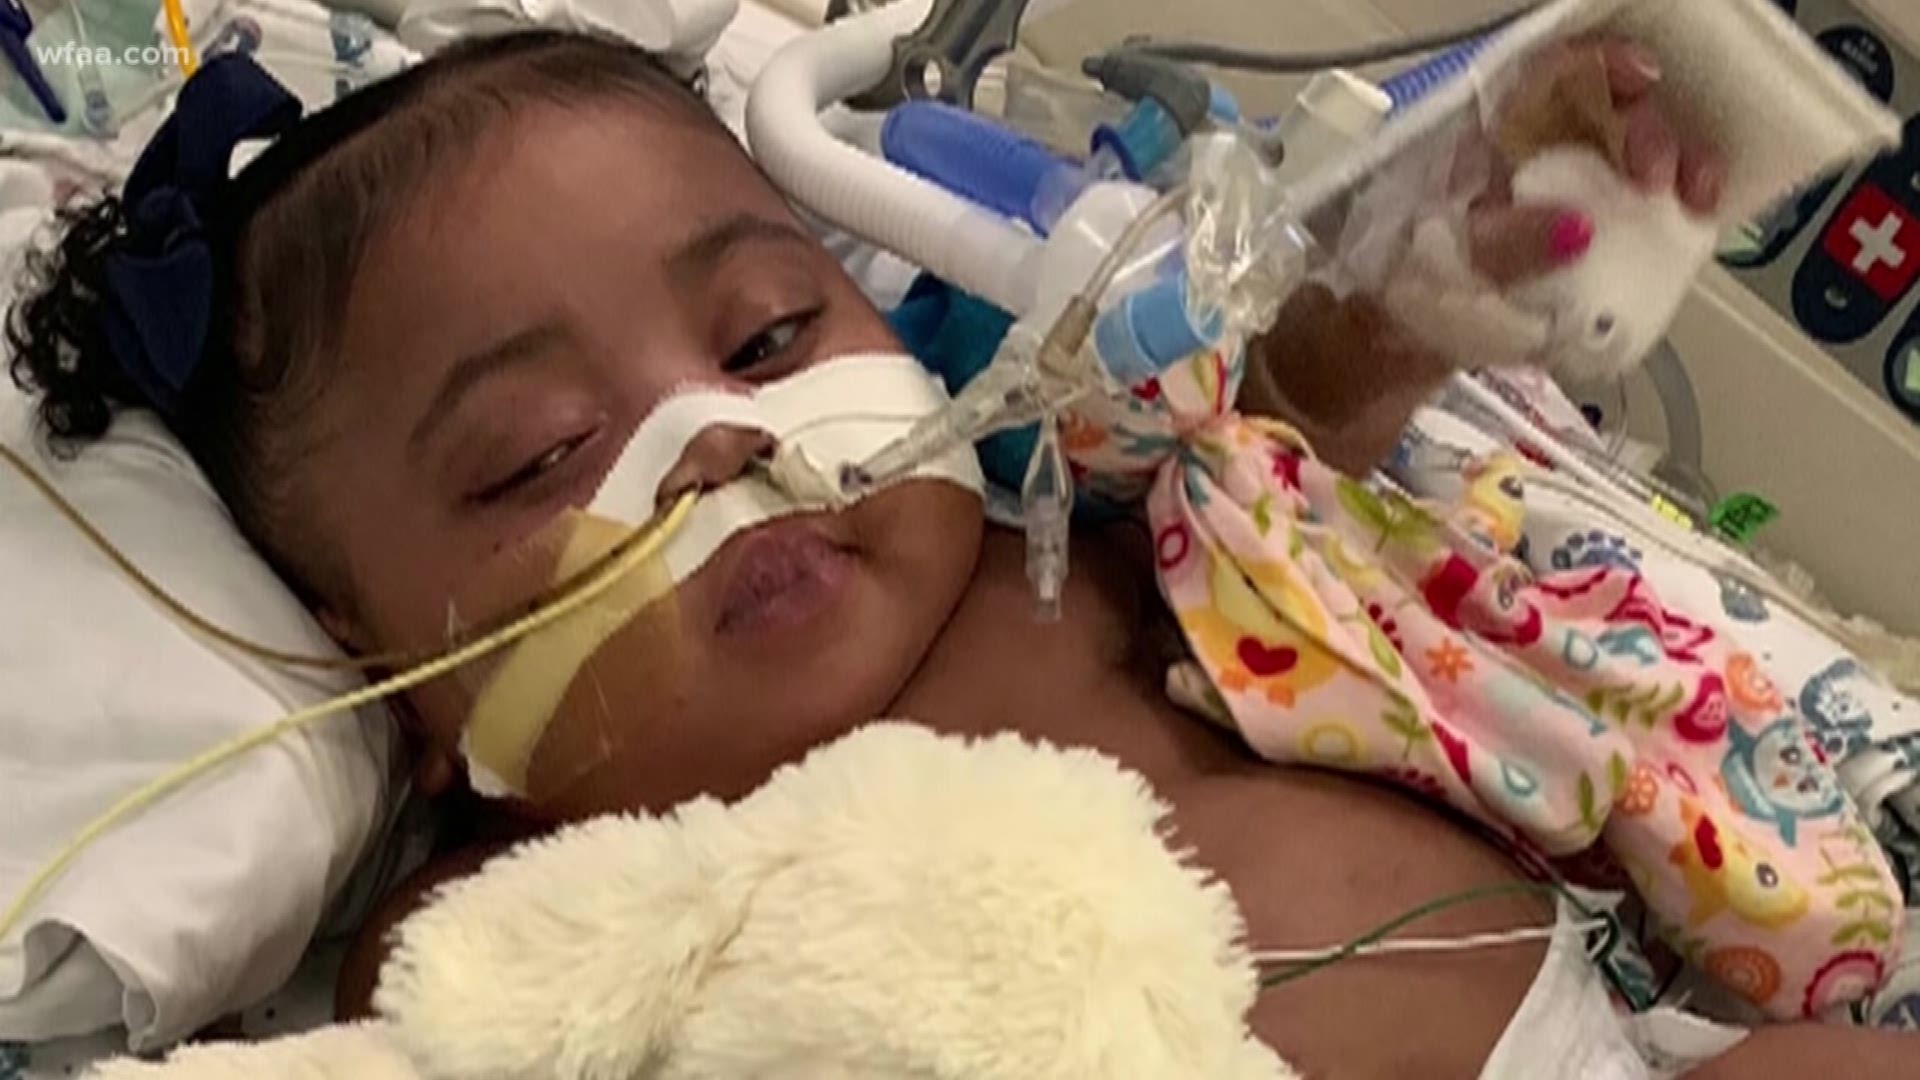 Tinslee has been hospitalized with grave lung and heart problems since birth. Her illness requires her to be hooked up to machines so she can breathe and eat.